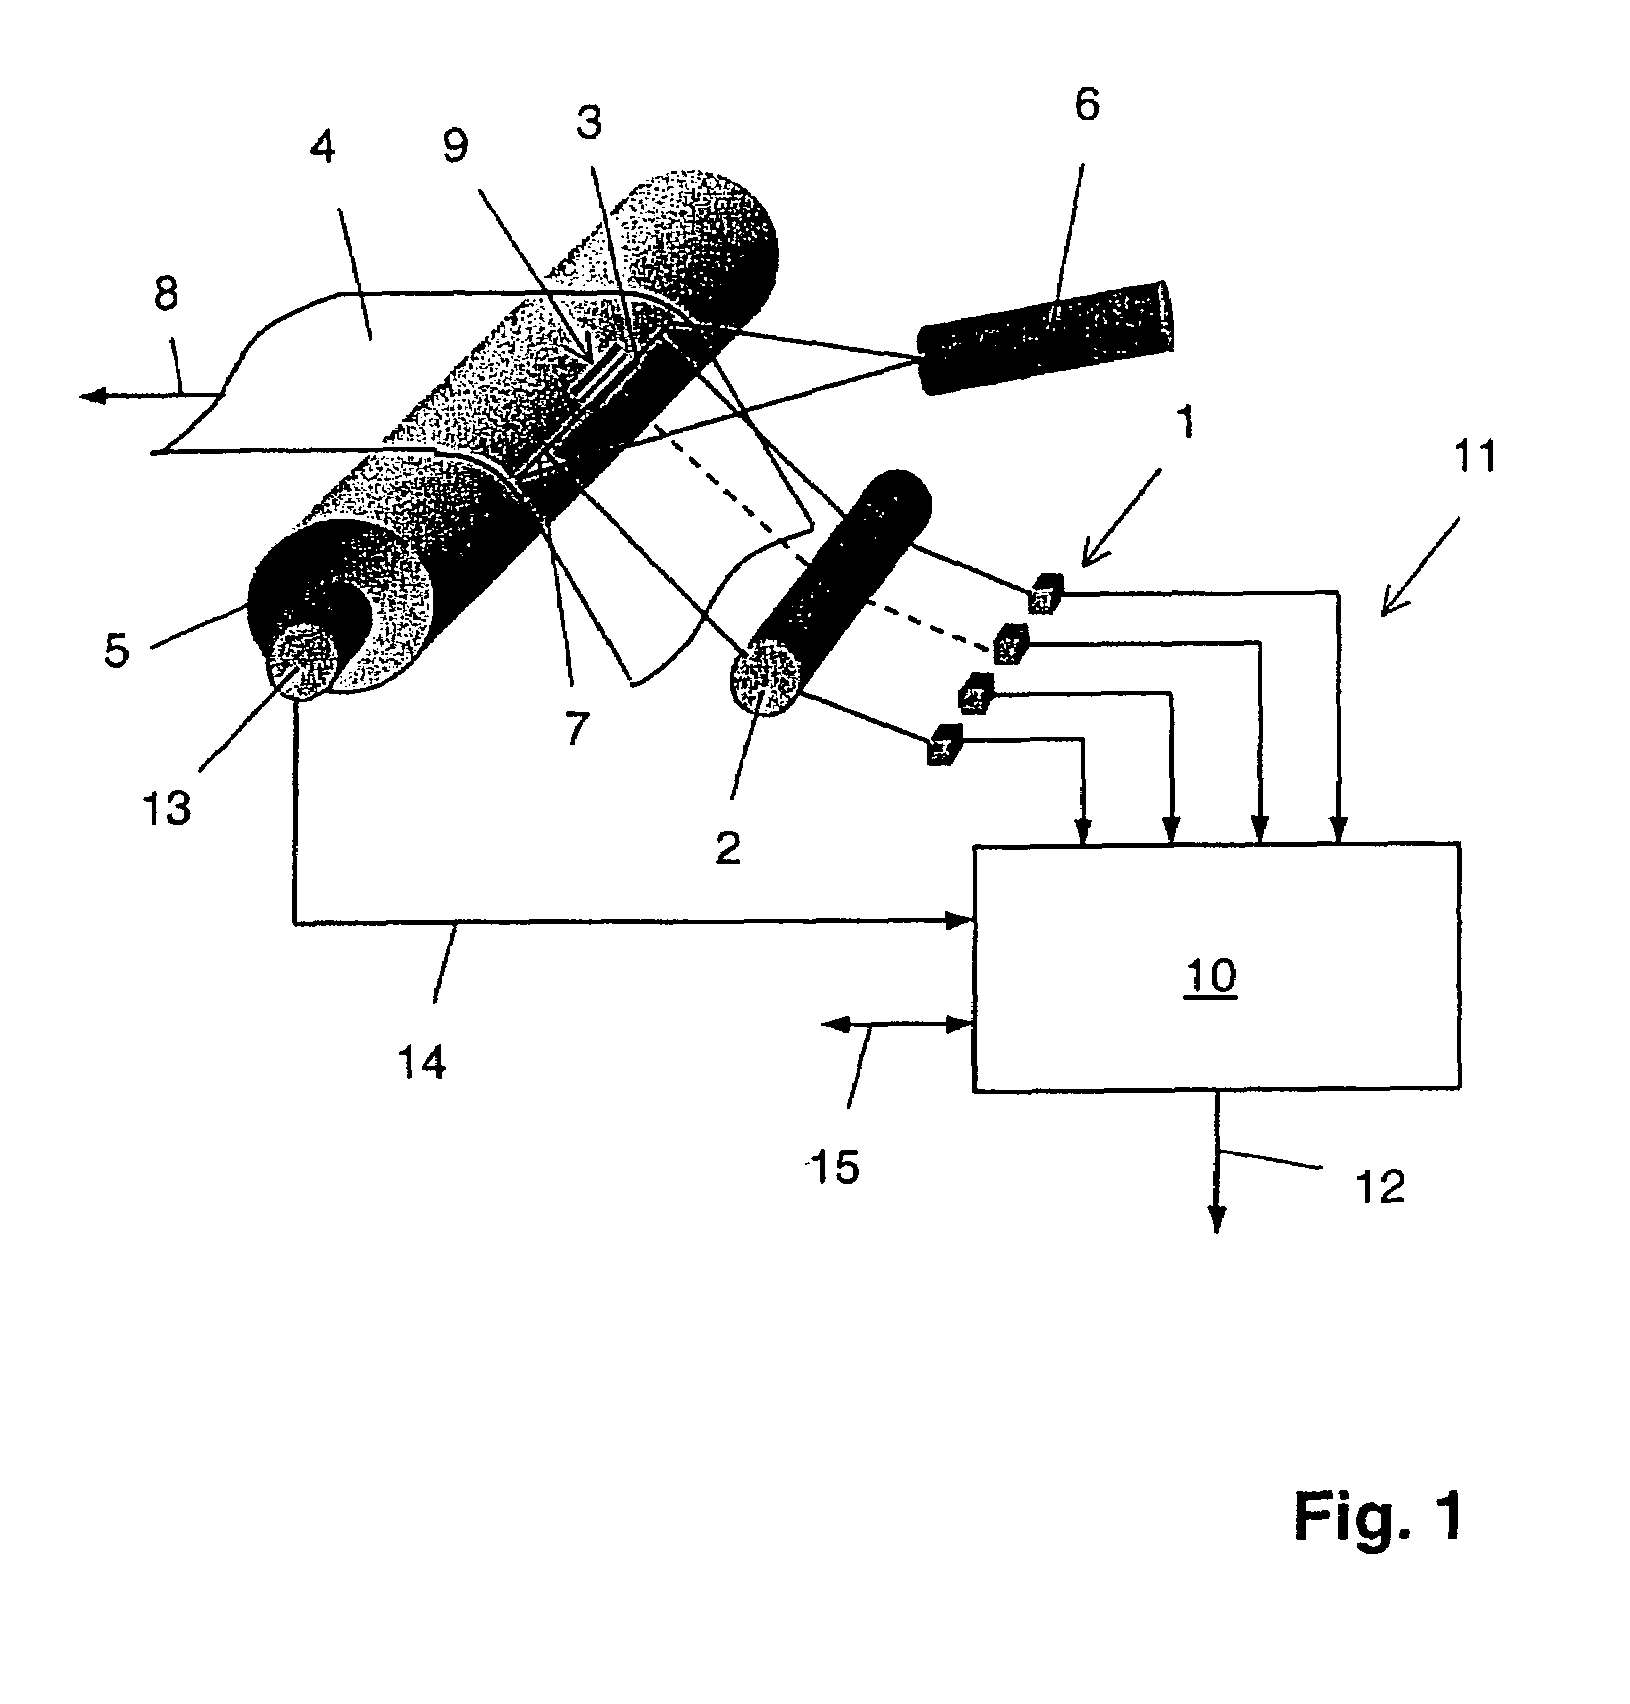 Apparatus and method for detecting a predetermined pattern on a moving printed product